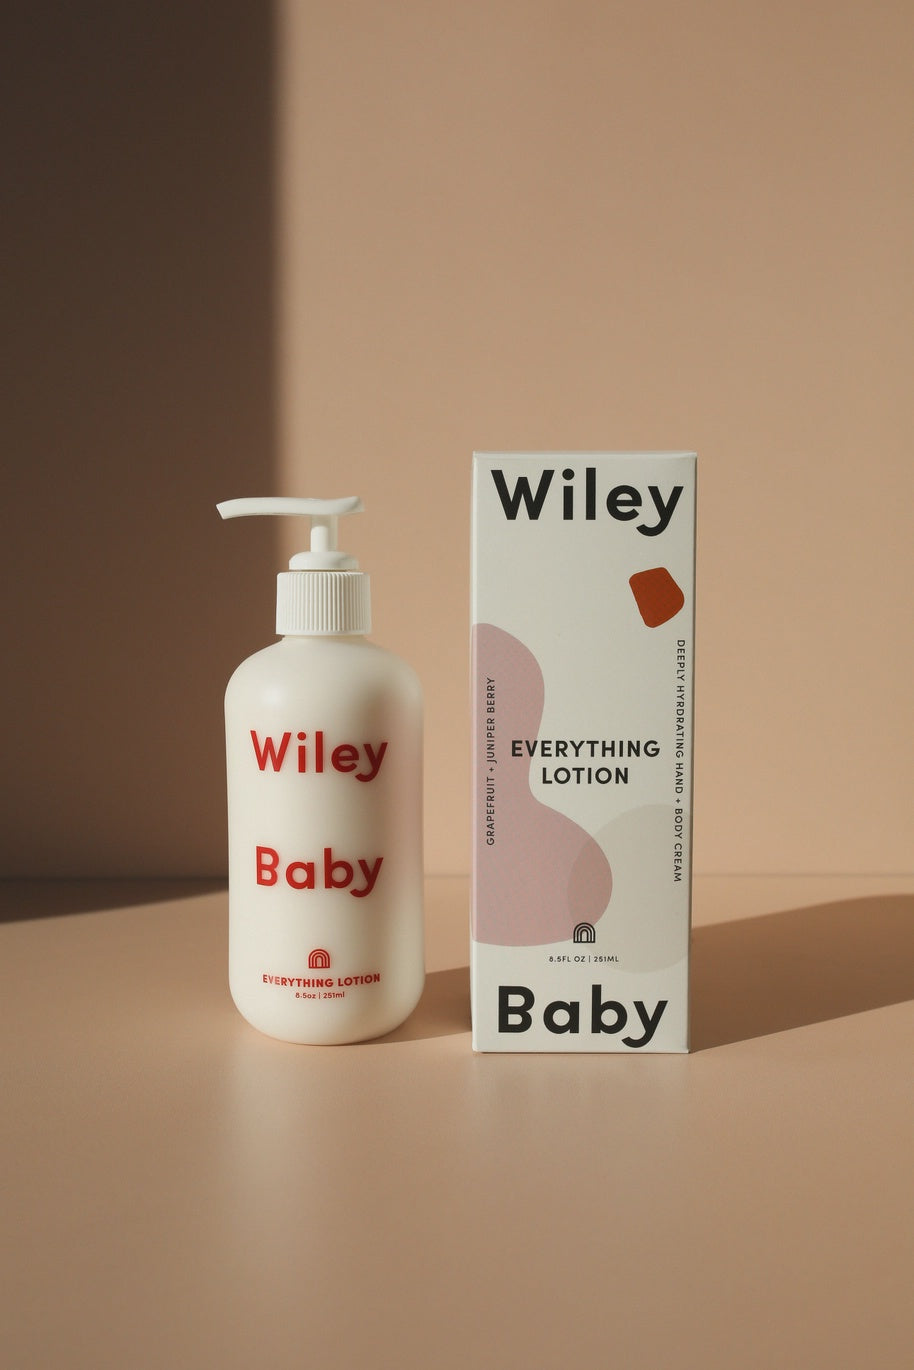 The Baby Everything Lotion by Wiley Body